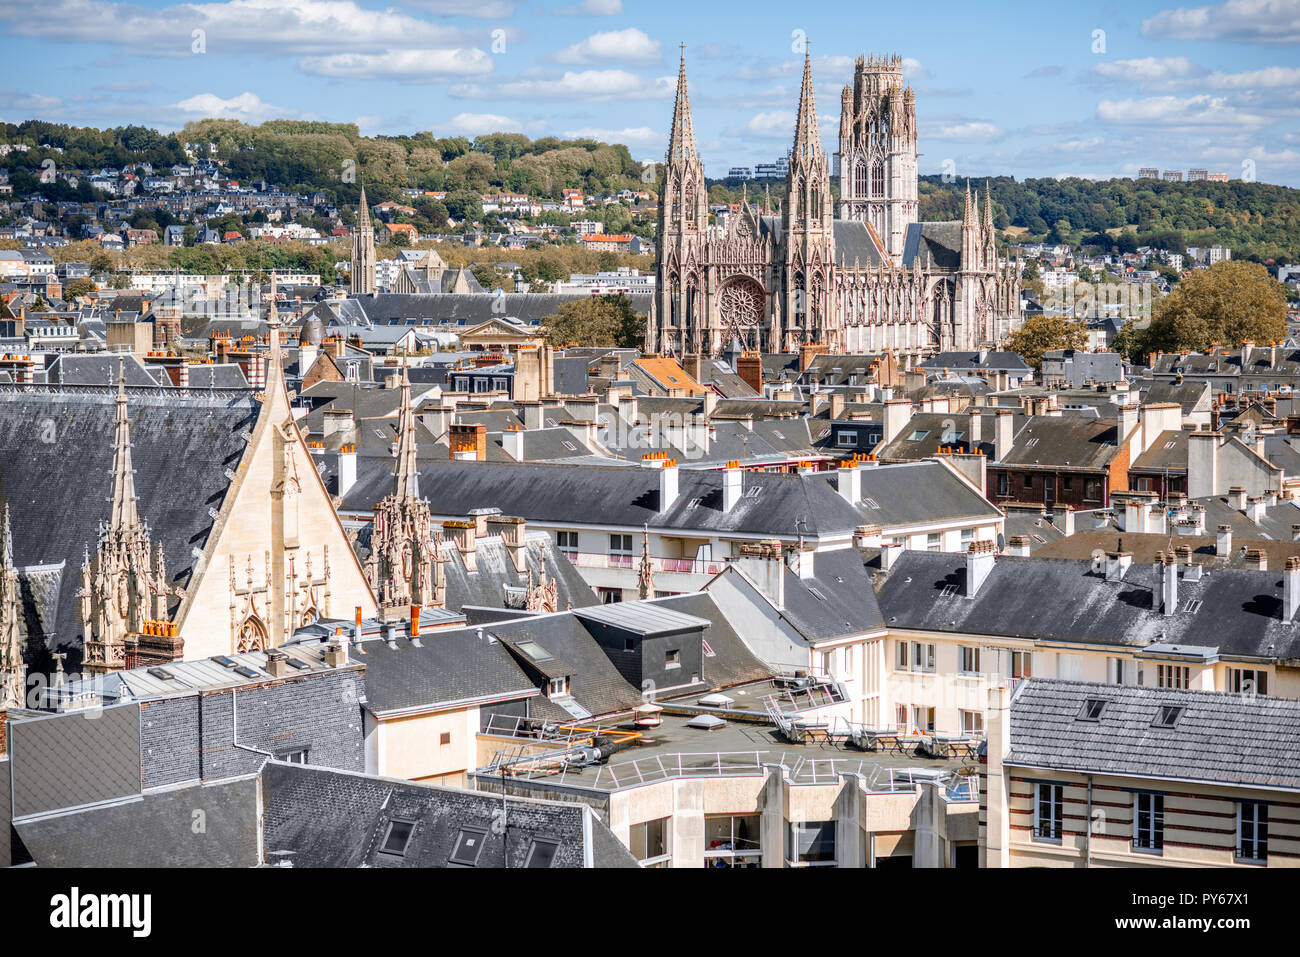 Aerial citysape view of Rouen during the sunny day in Normandy, France Stock Photo